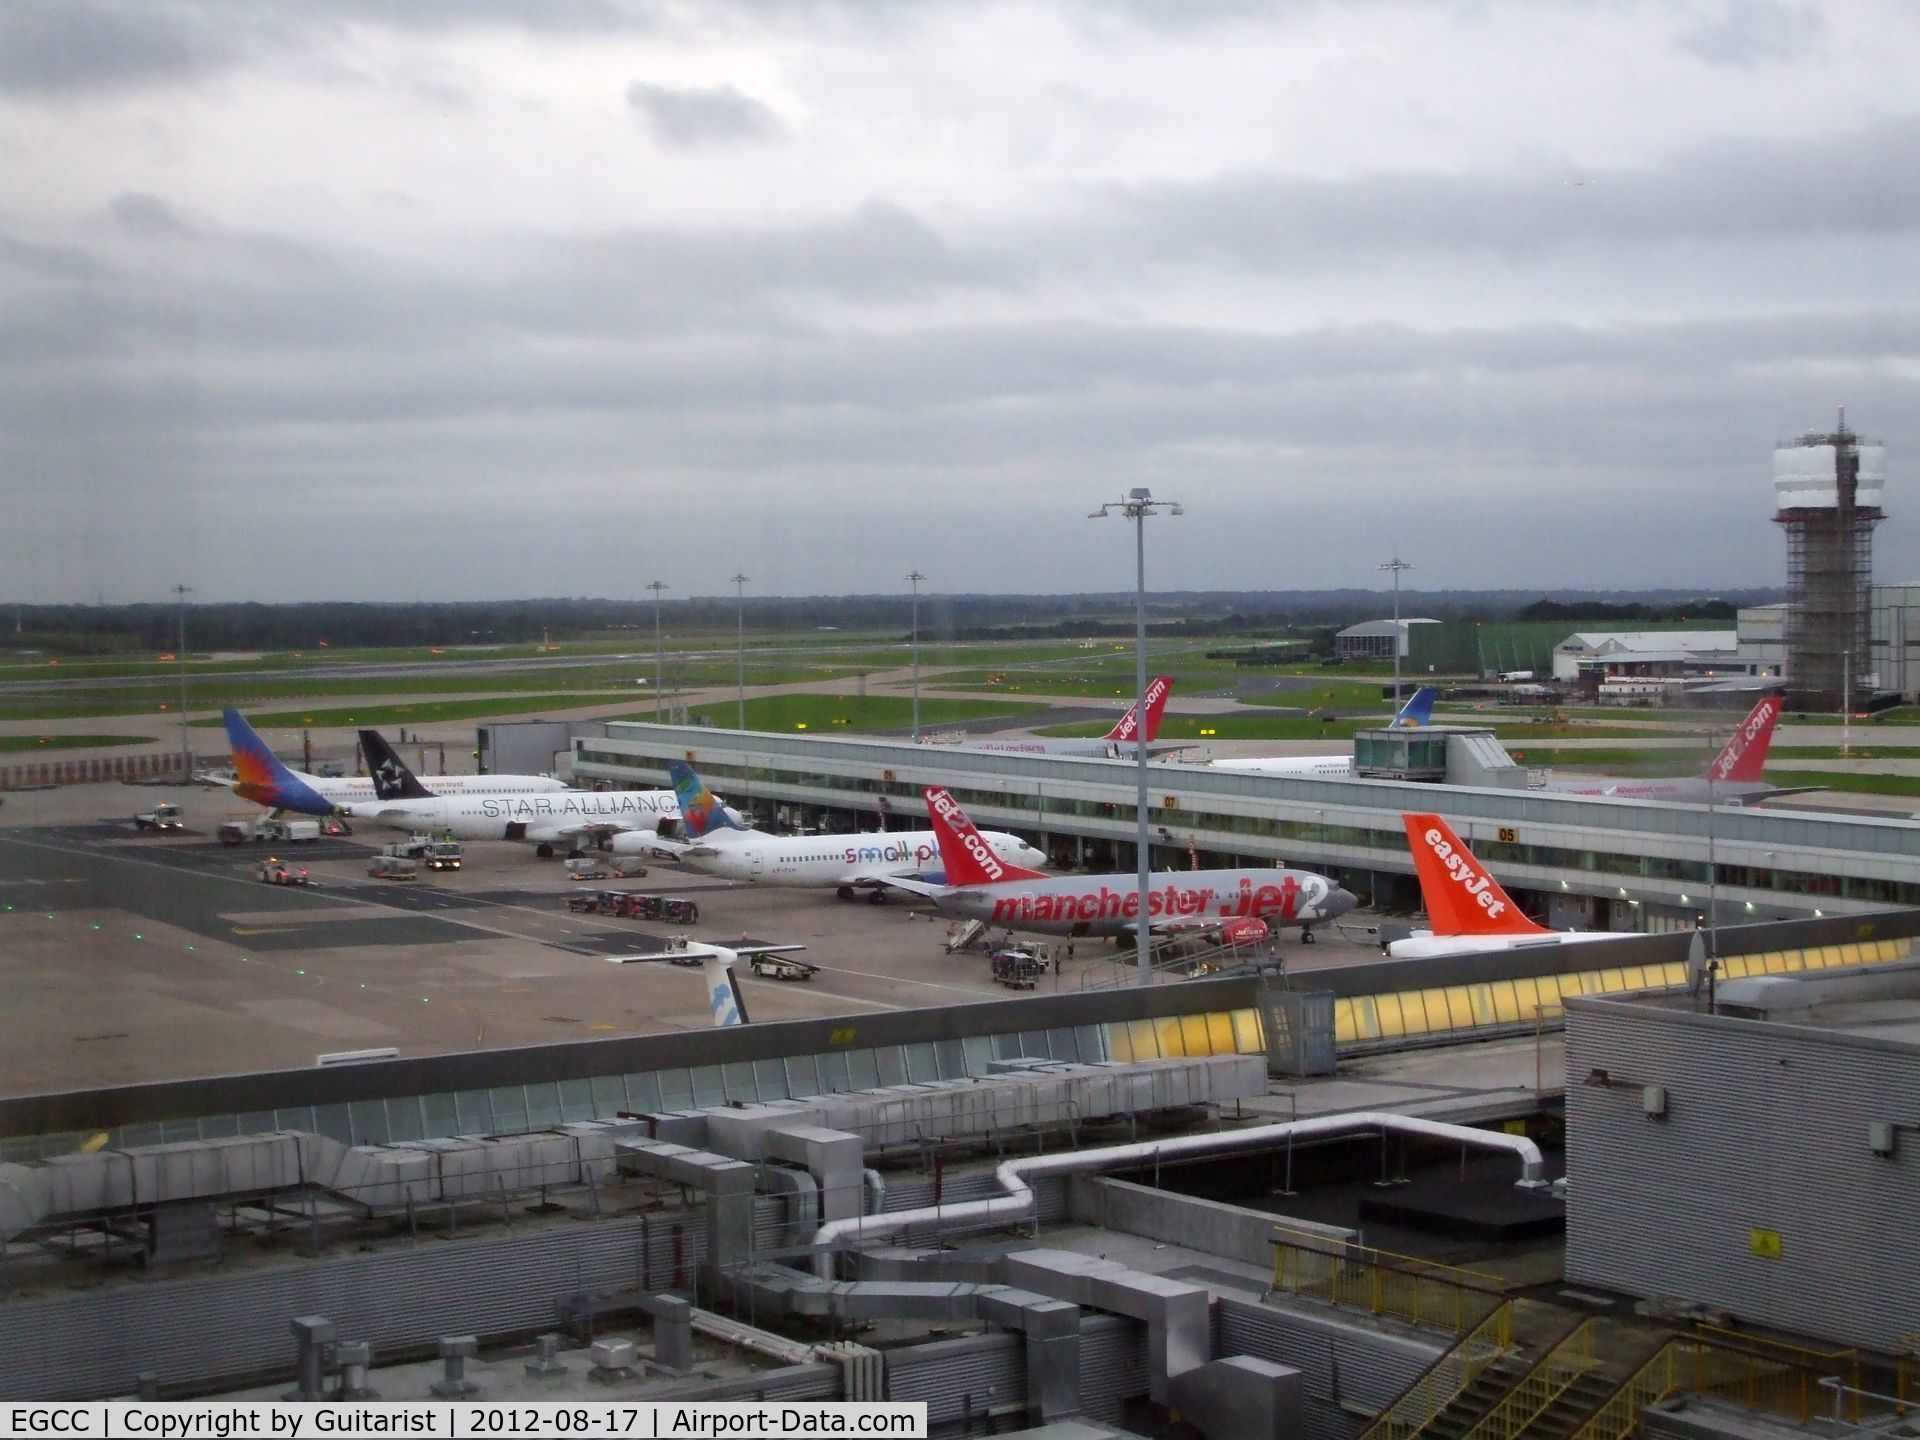 Manchester Airport, Manchester, England United Kingdom (EGCC) - A wet Friday morning at Manchester